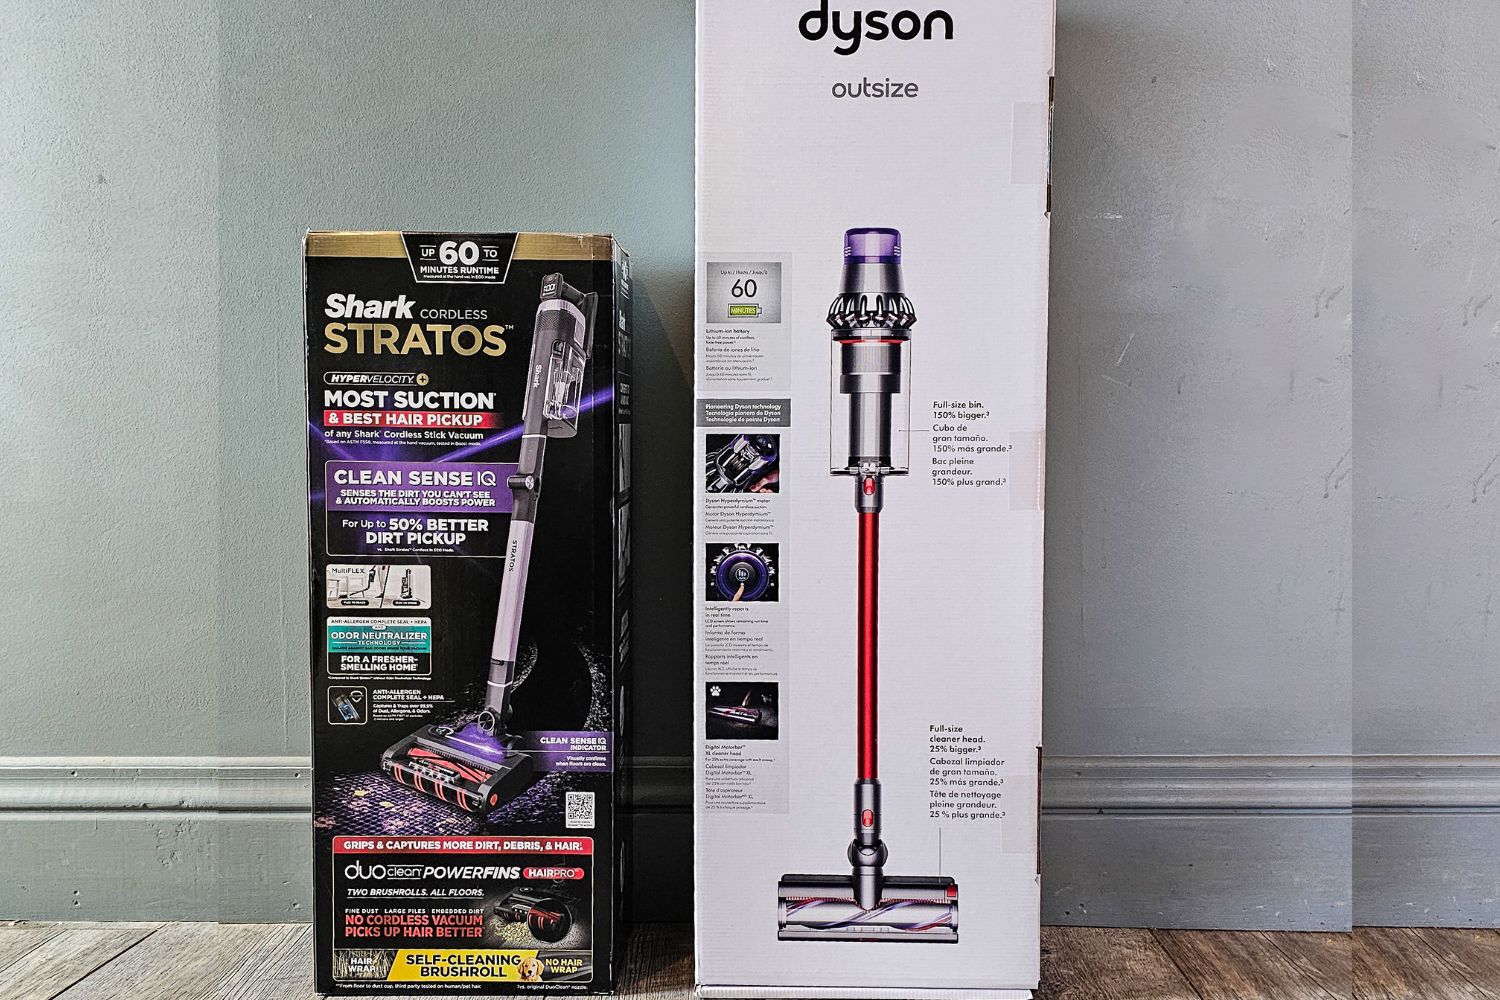 Dyson vs Shark boxes next to each other before unboxing and testing.